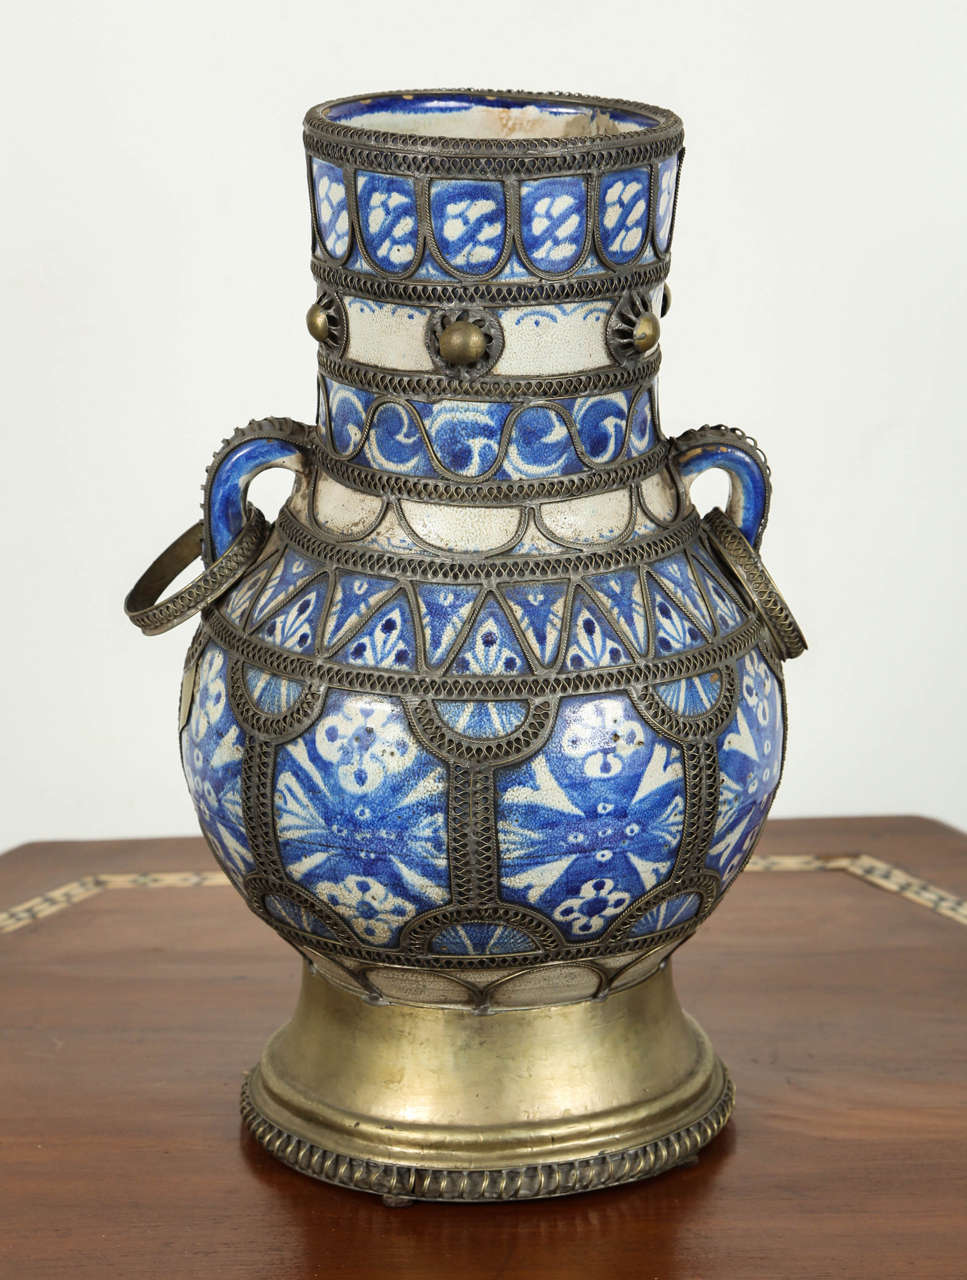 Antique Moroccan ceramic vase from Fez.
Moorish style handcrafted vase adorned with fine filigree silver nickel work, with two handles.
Antique Hispano Moresque design on ceramic bleu de Fez urn.
Museum quality.
Handcrafted in Fez, Morocco circa